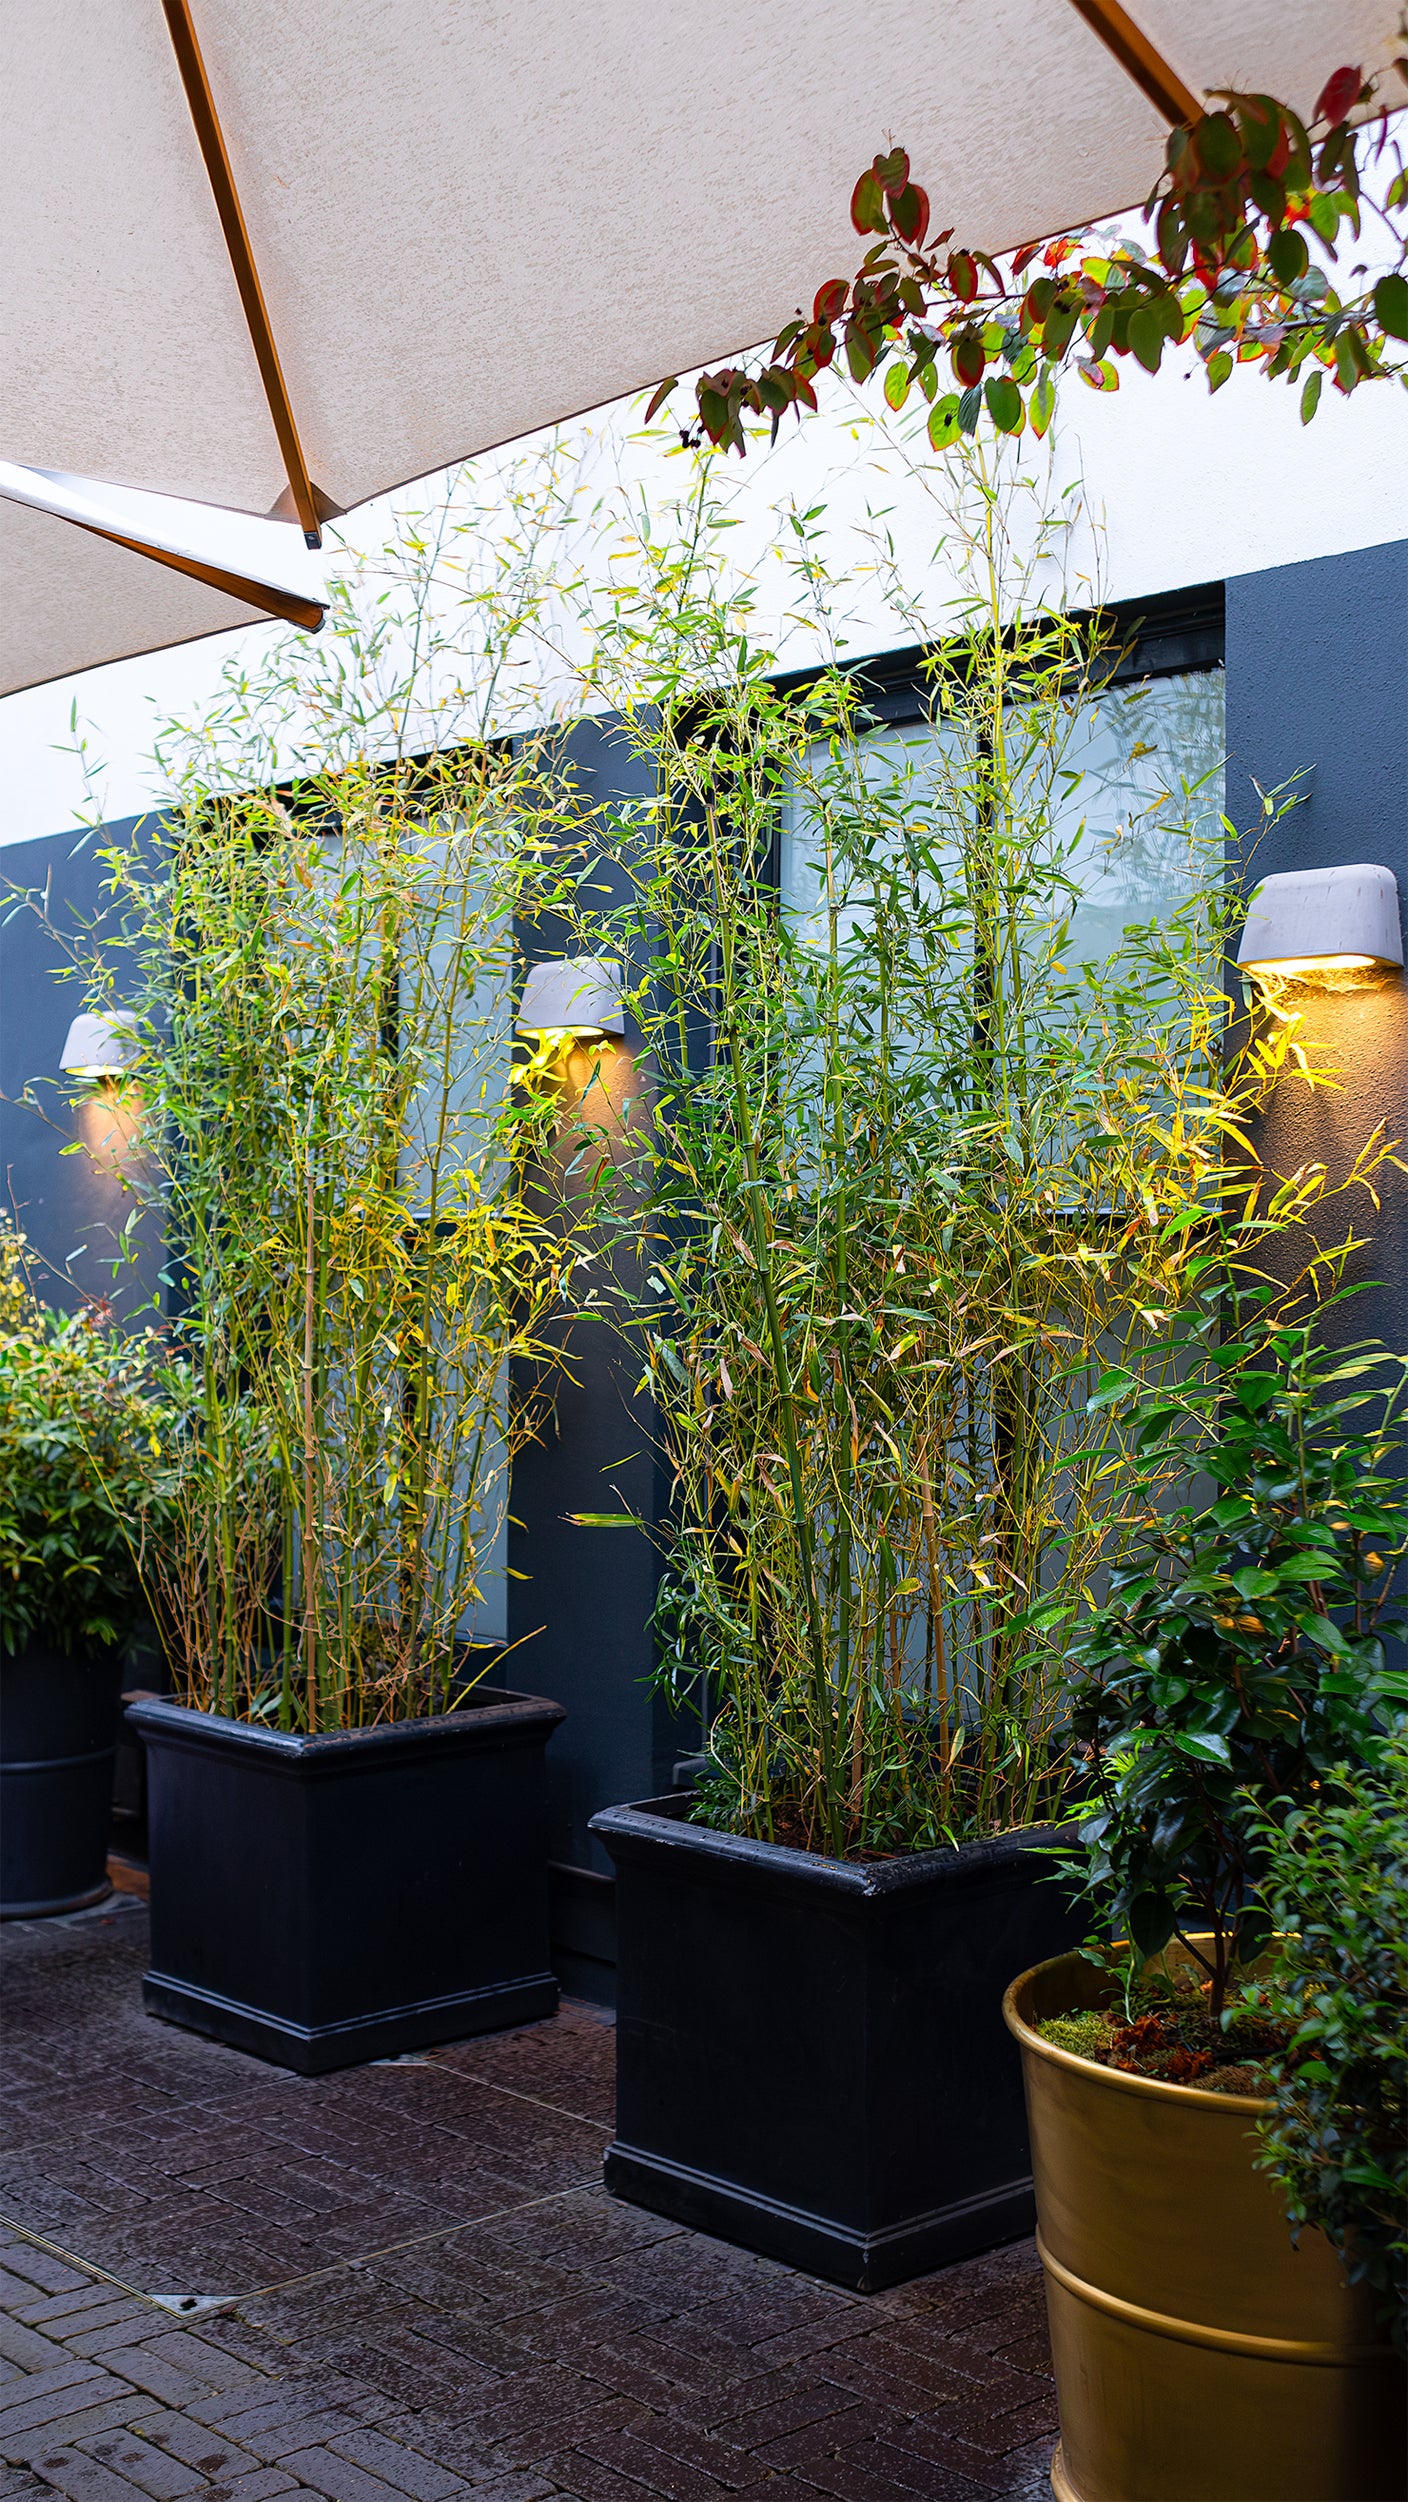 Outdoor terrace at Beaverbrook Town House decorated with lush green bamboo plants in black planters for the Sensai product launch - Amarante London